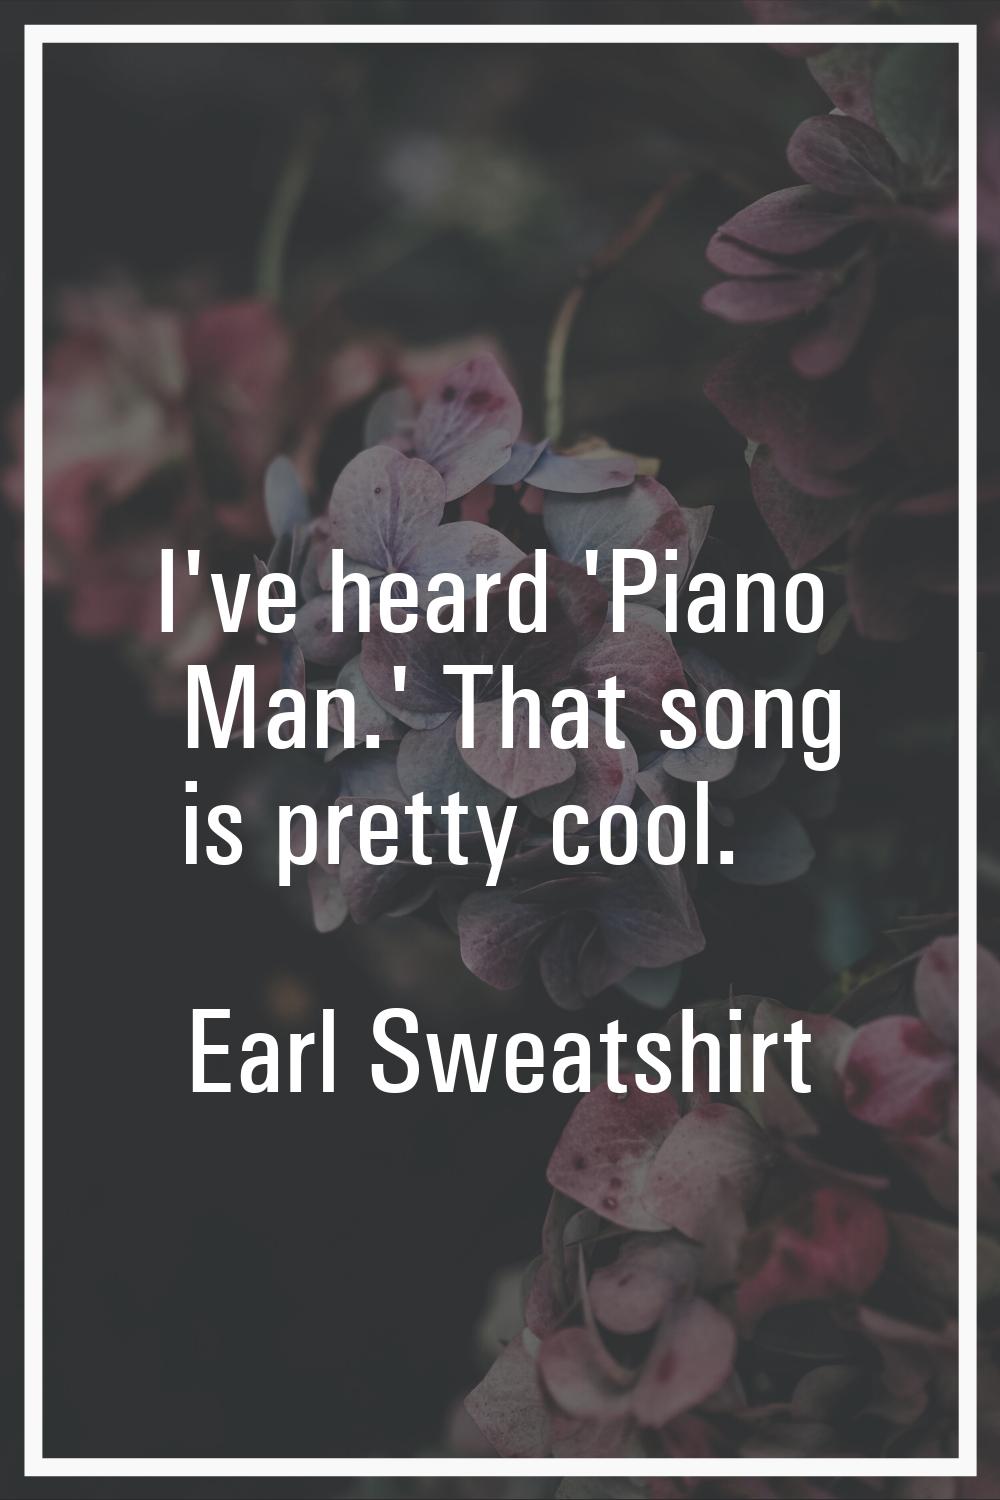 I've heard 'Piano Man.' That song is pretty cool.